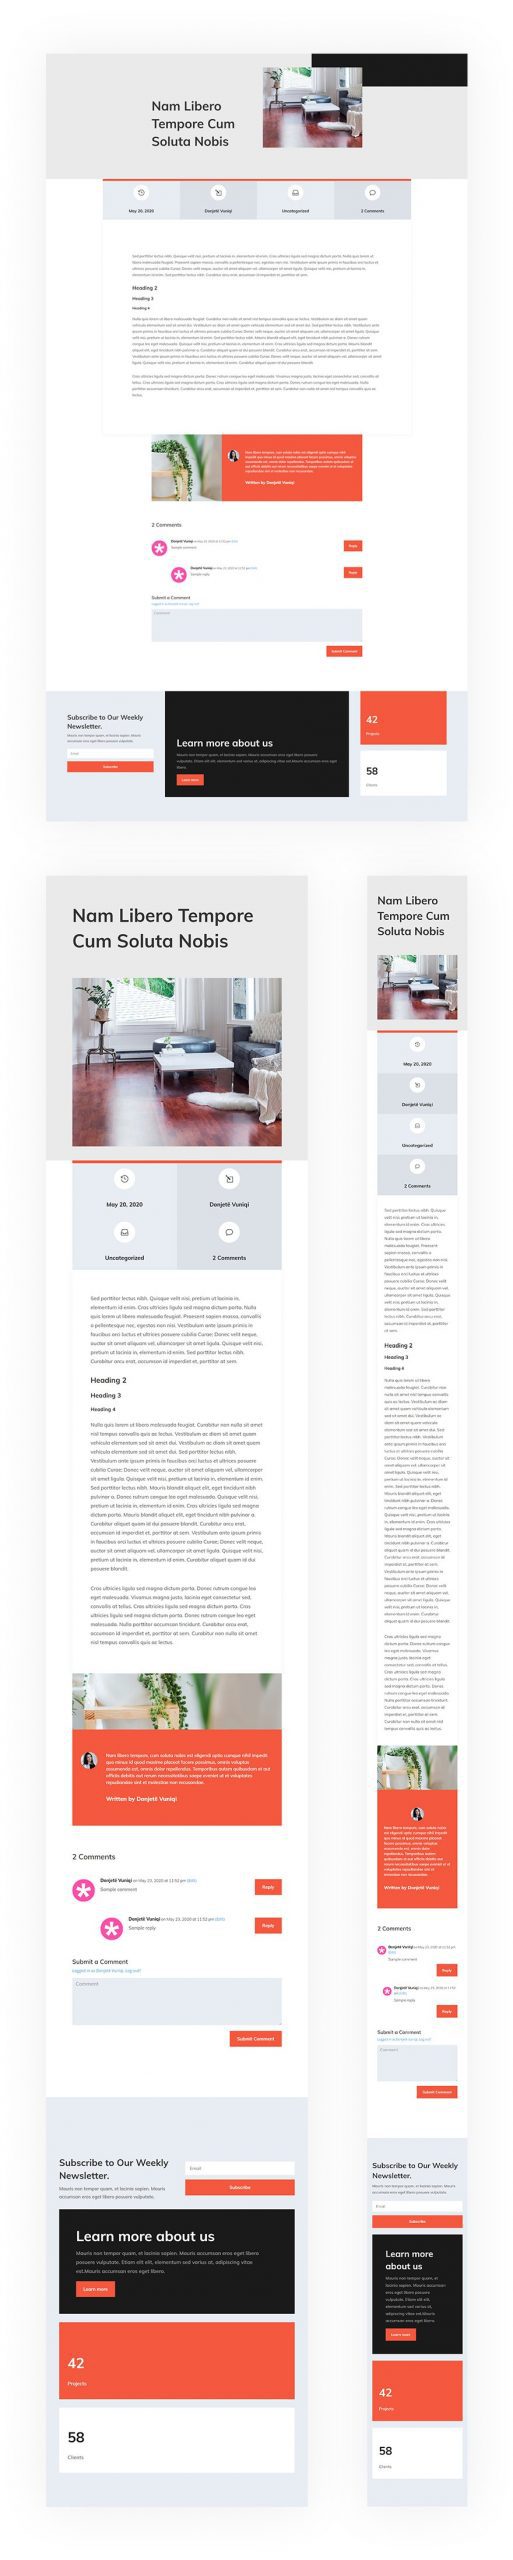 Blog Post Template for Interior Design Layout